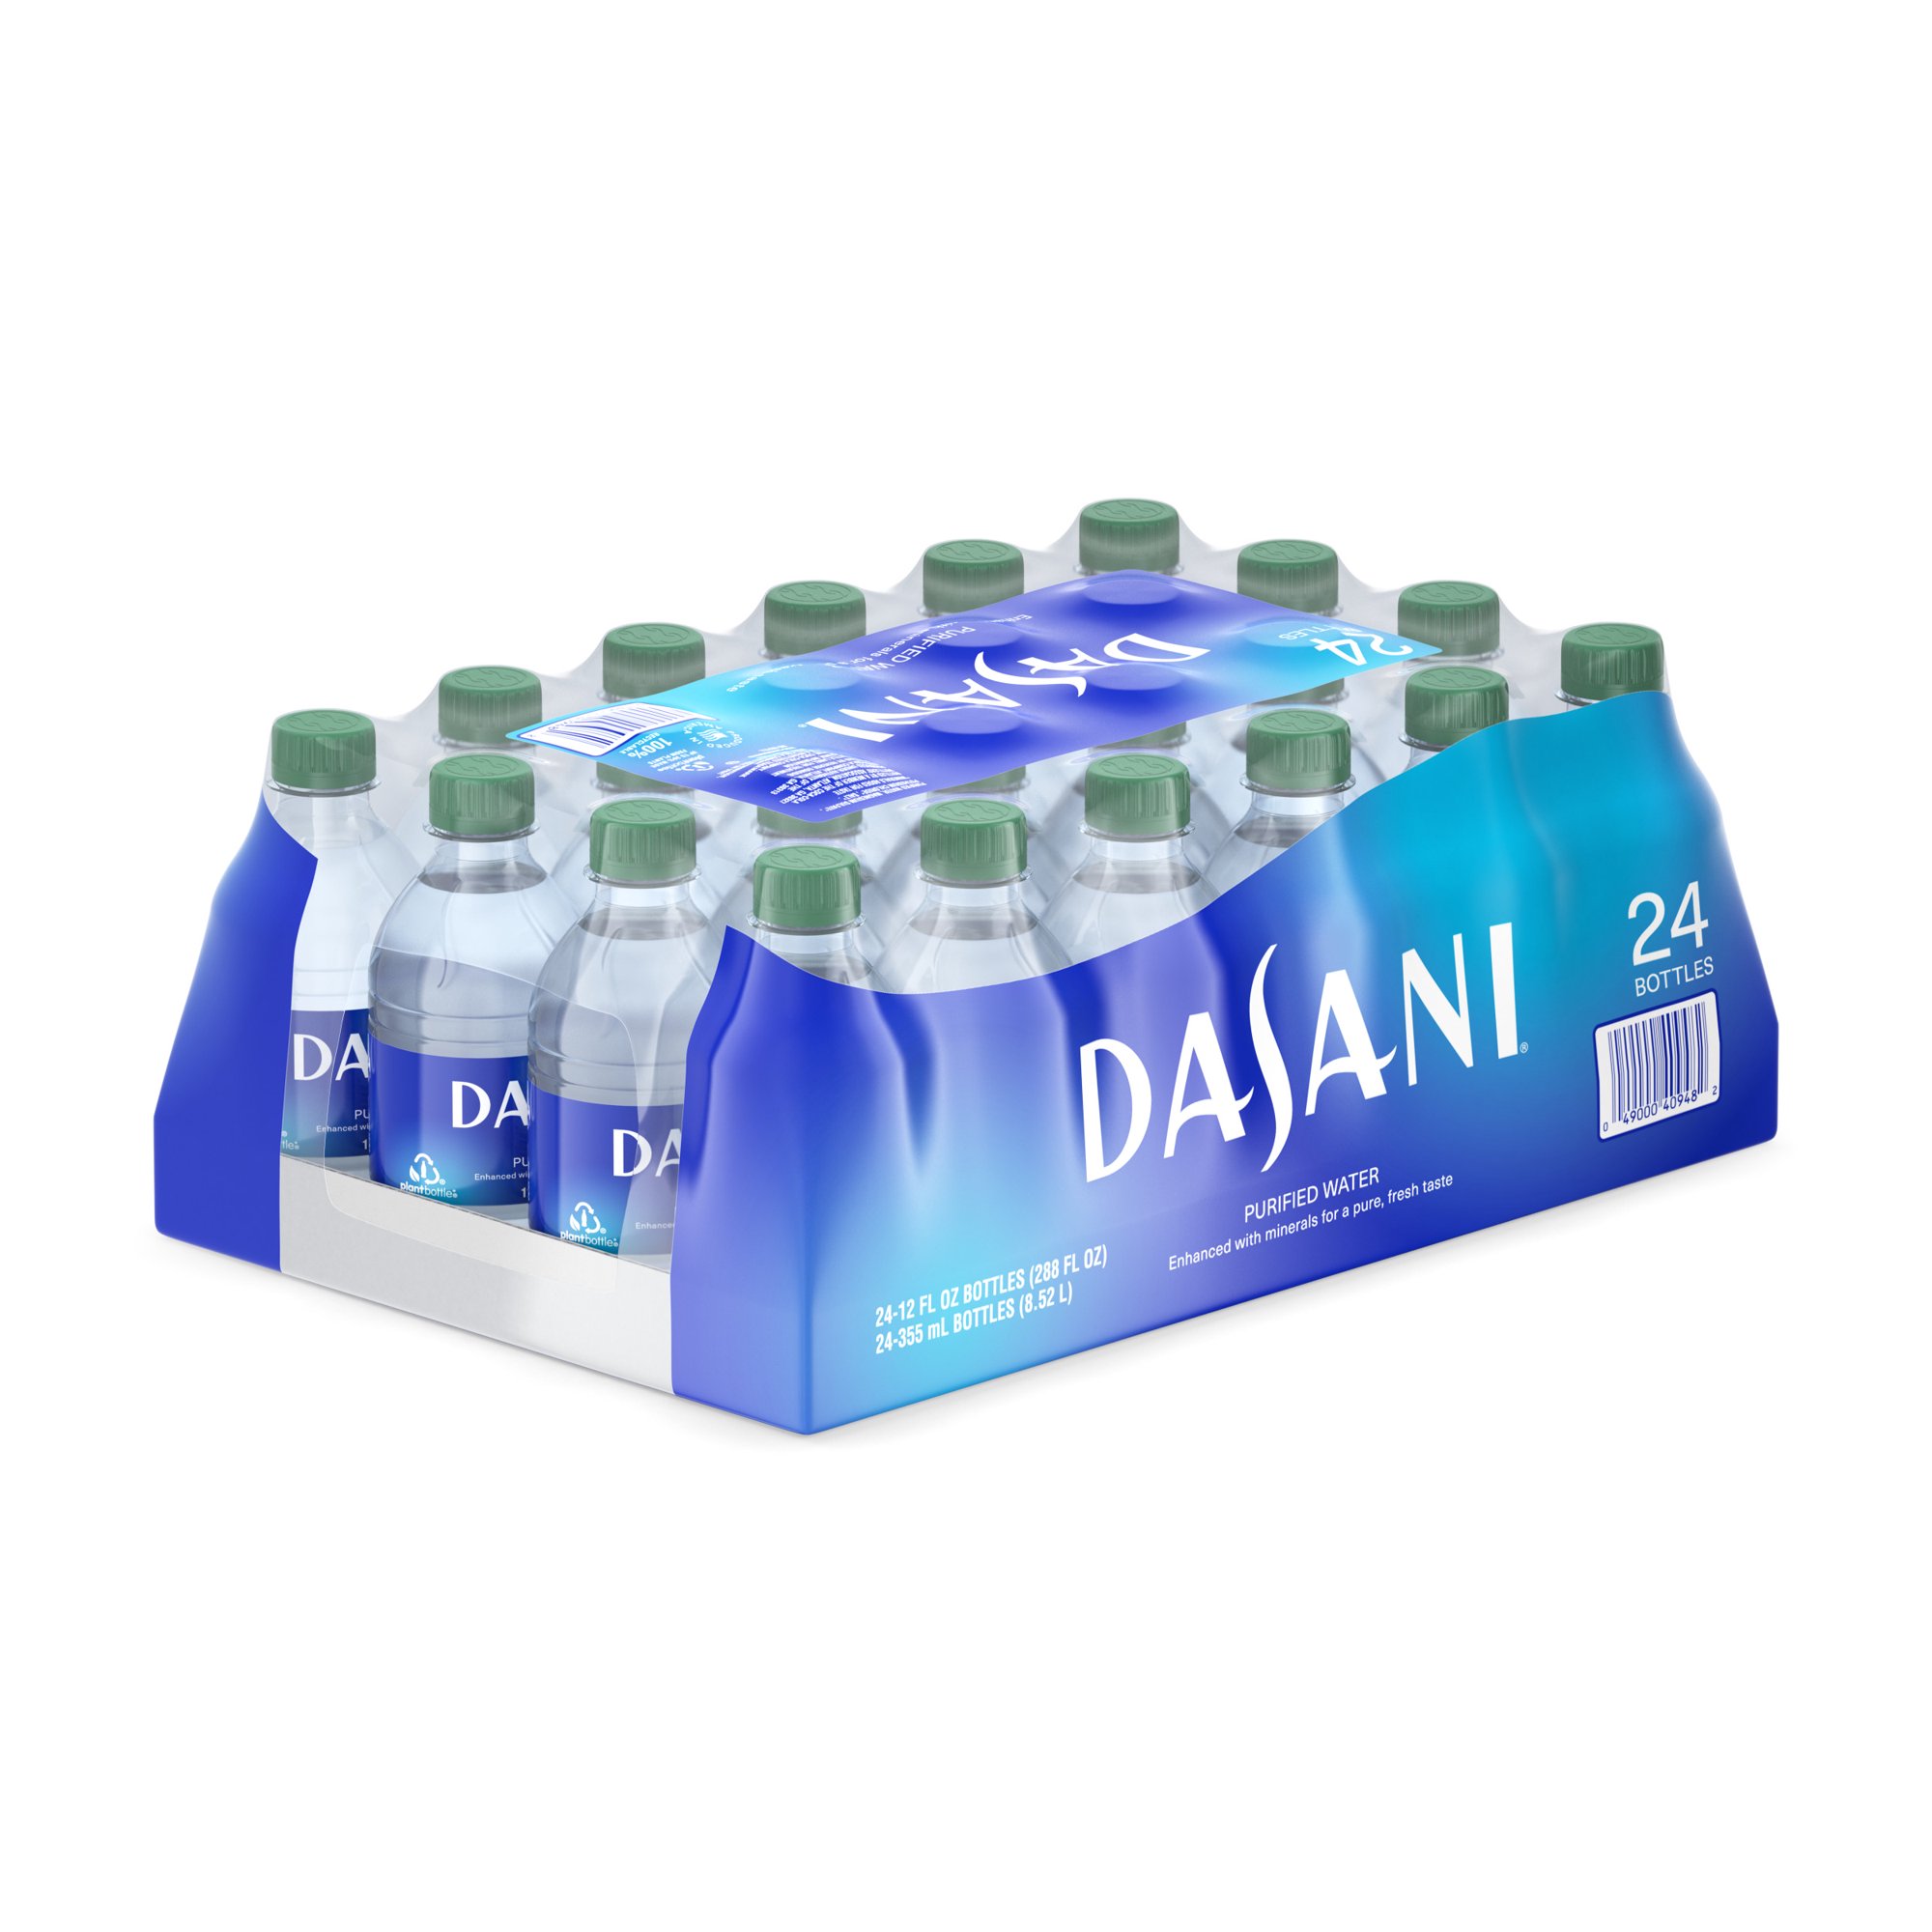 DASANI Purified Water Bottles Enhanced with Minerals, 12 fl oz, 24 Pack